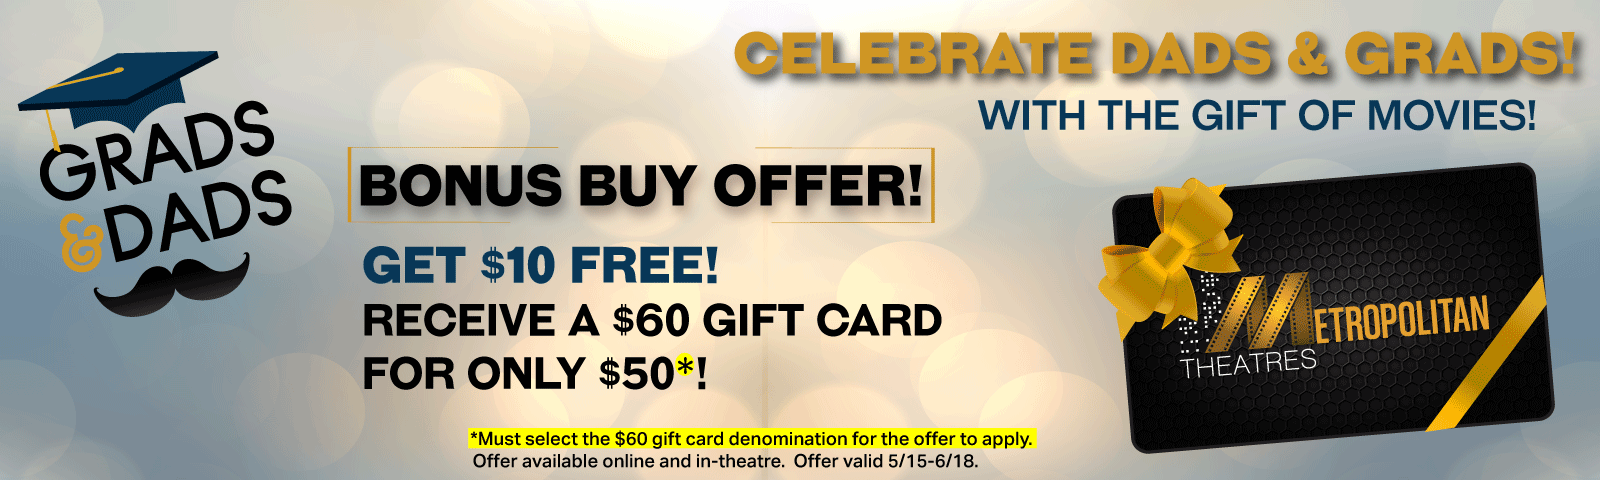 Grads & Dads Gift Card Promotion